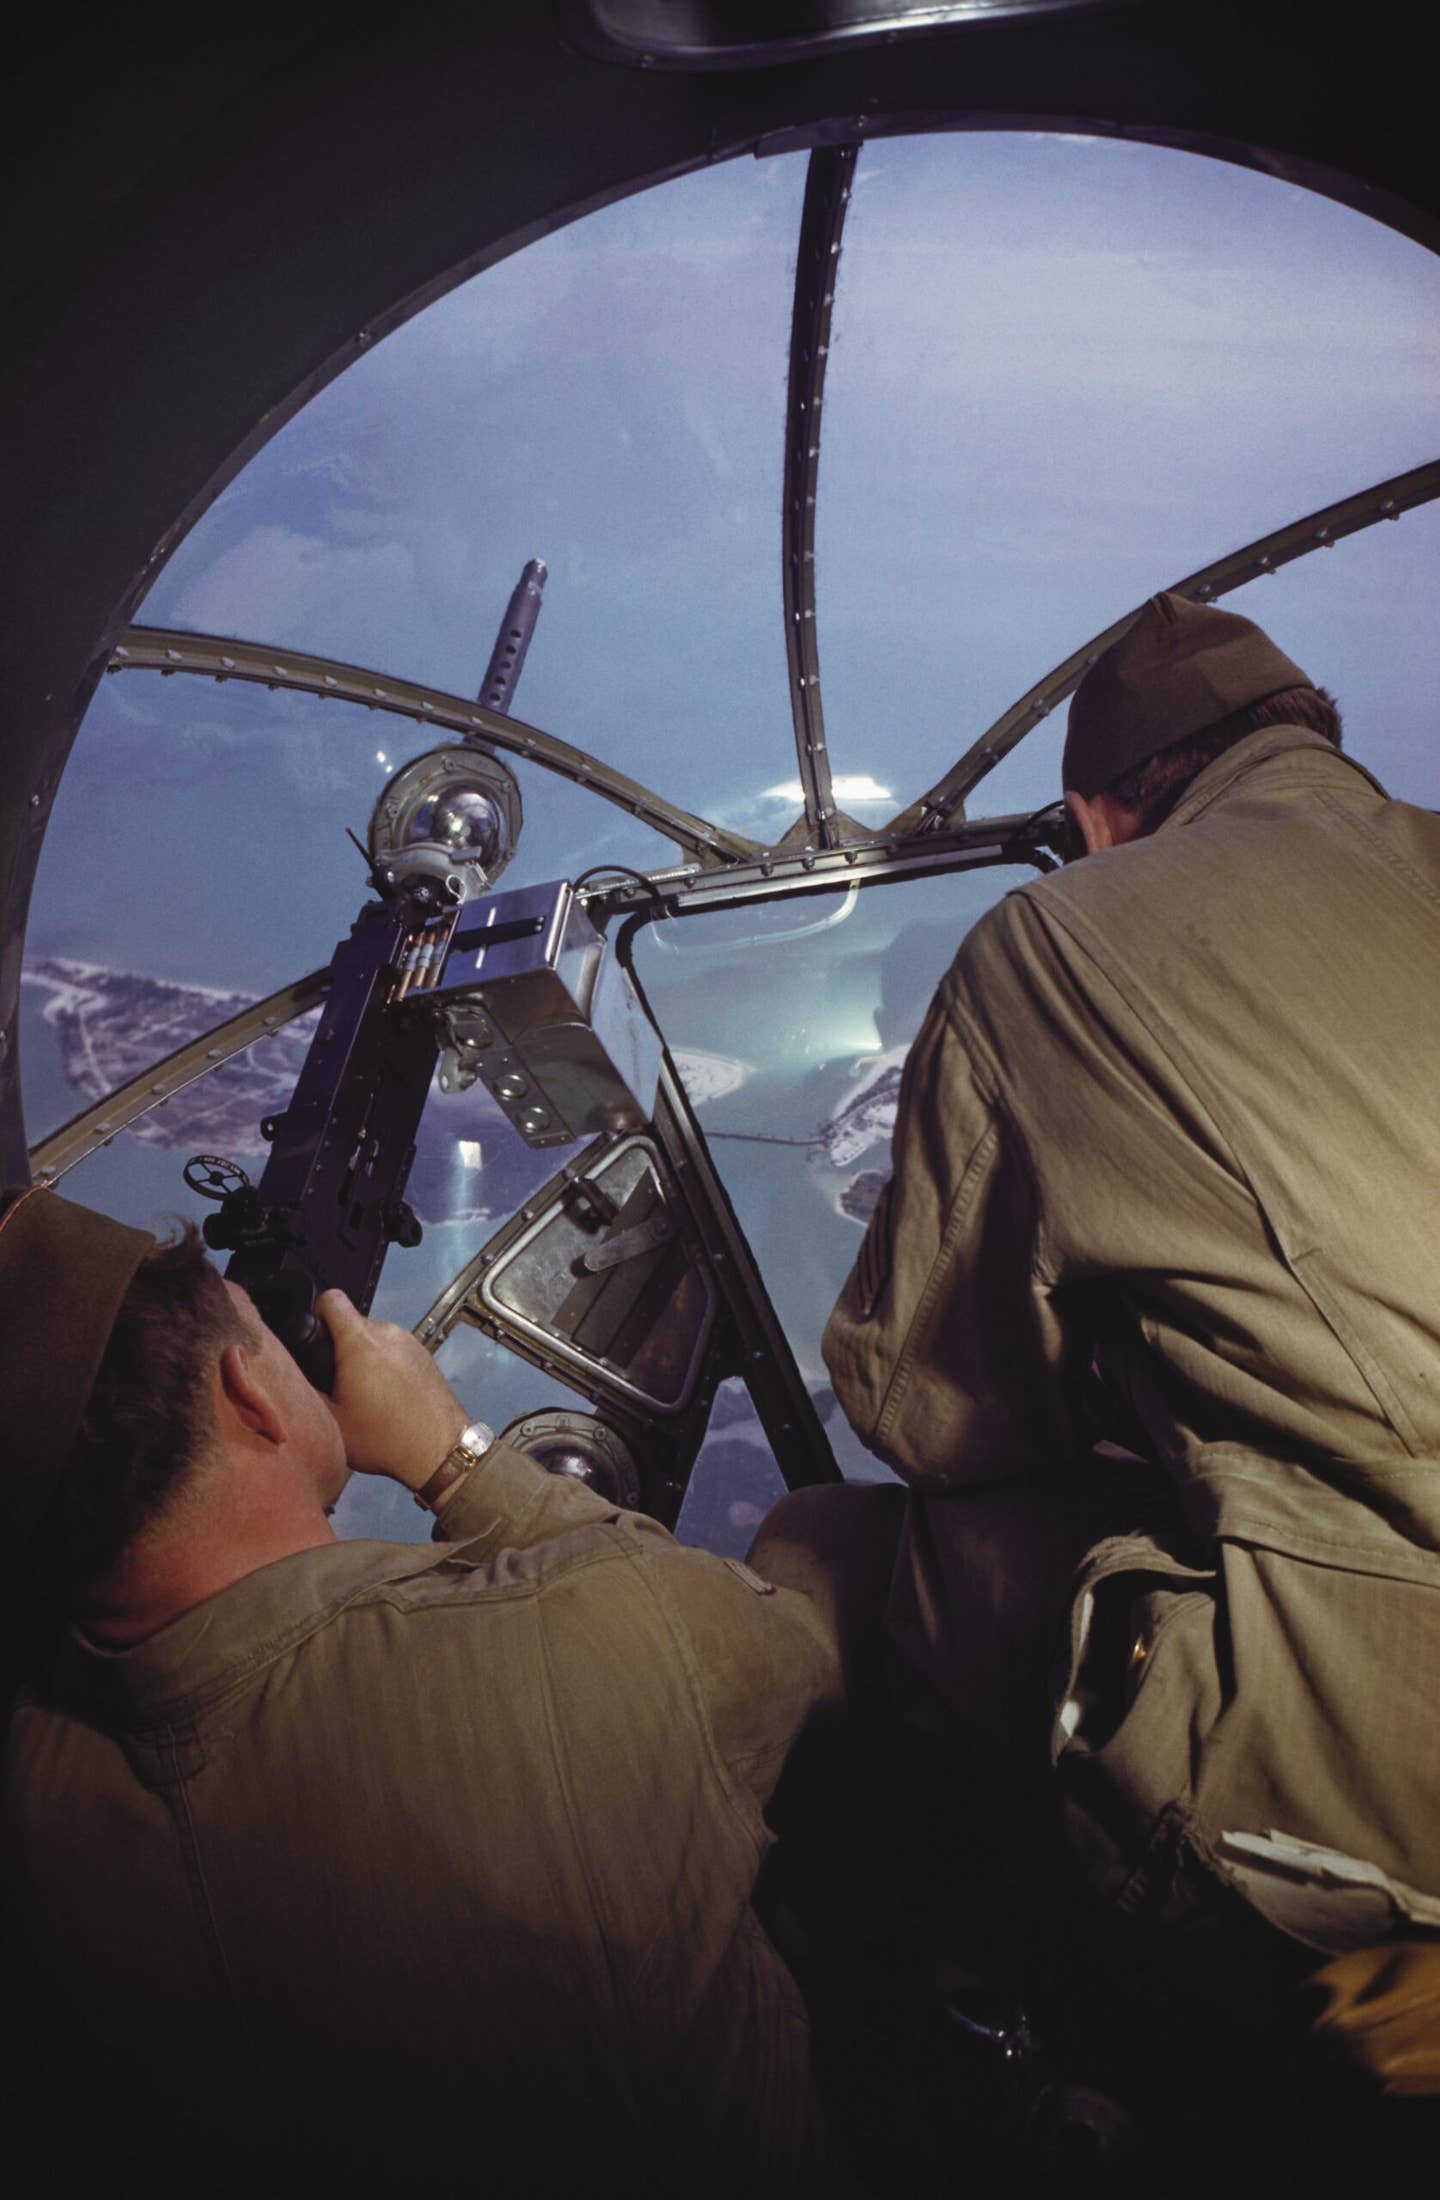 Bomber crew in the nose of a B-17 in the run-up to World War II. The limited traverse available on the gun mounted in the nose transparency is evident. <em>Photo by Ivan Dmitri/Michael Ochs Archives/Getty Images</em>